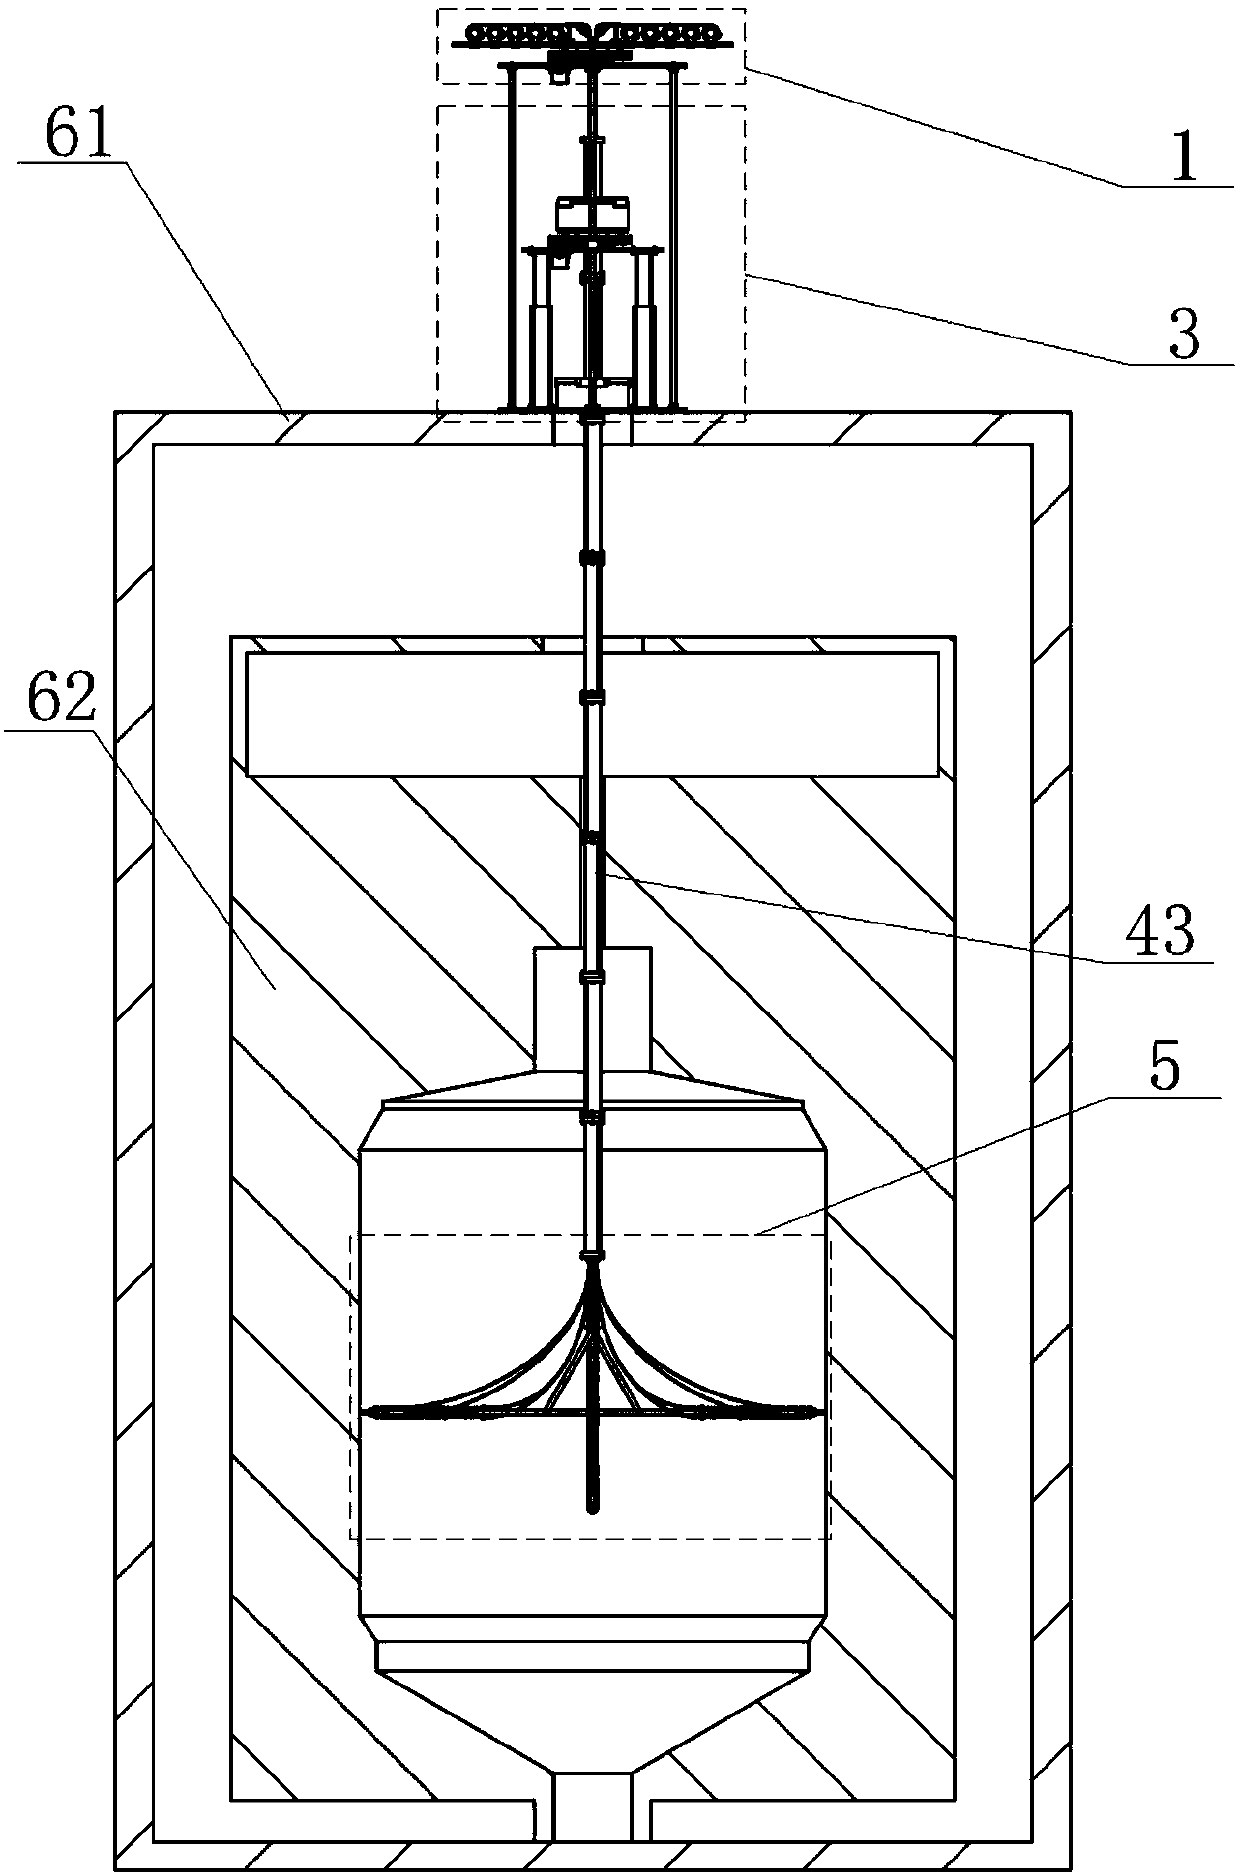 Robot device for visually detecting component in core cavity of pebble bed reactor